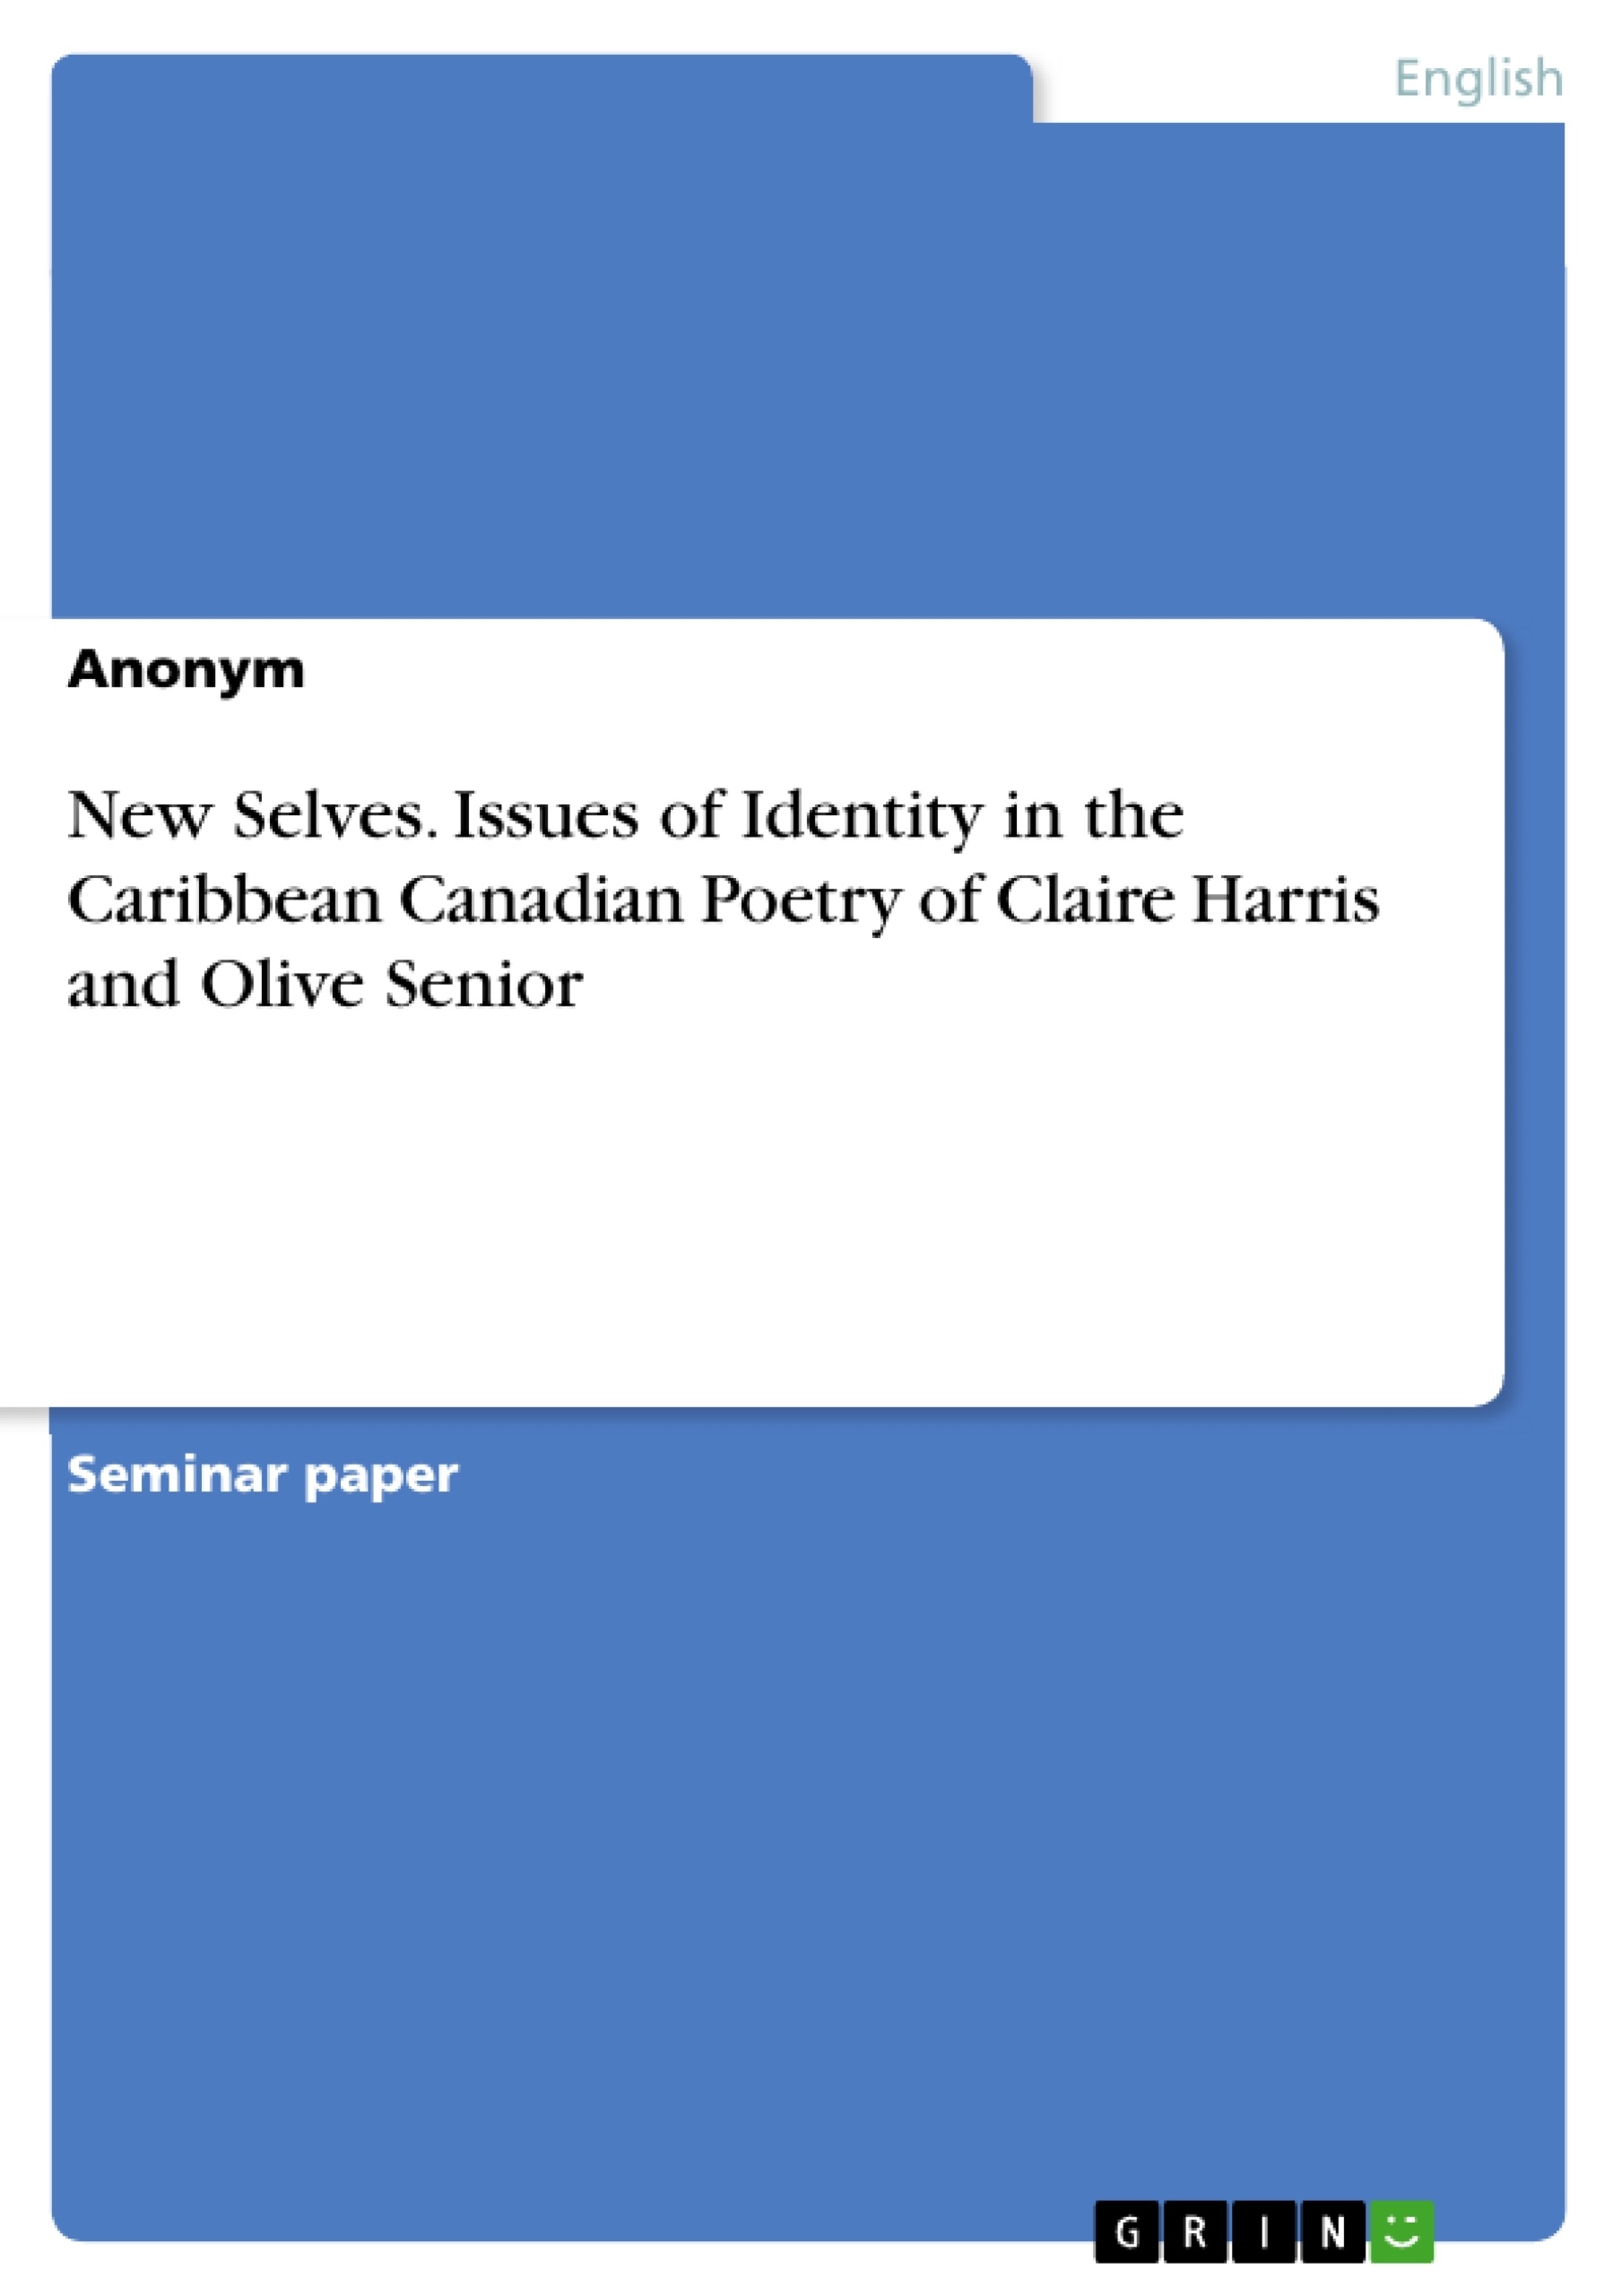 Title: New Selves. Issues of Identity in the Caribbean Canadian Poetry of Claire Harris and Olive Senior